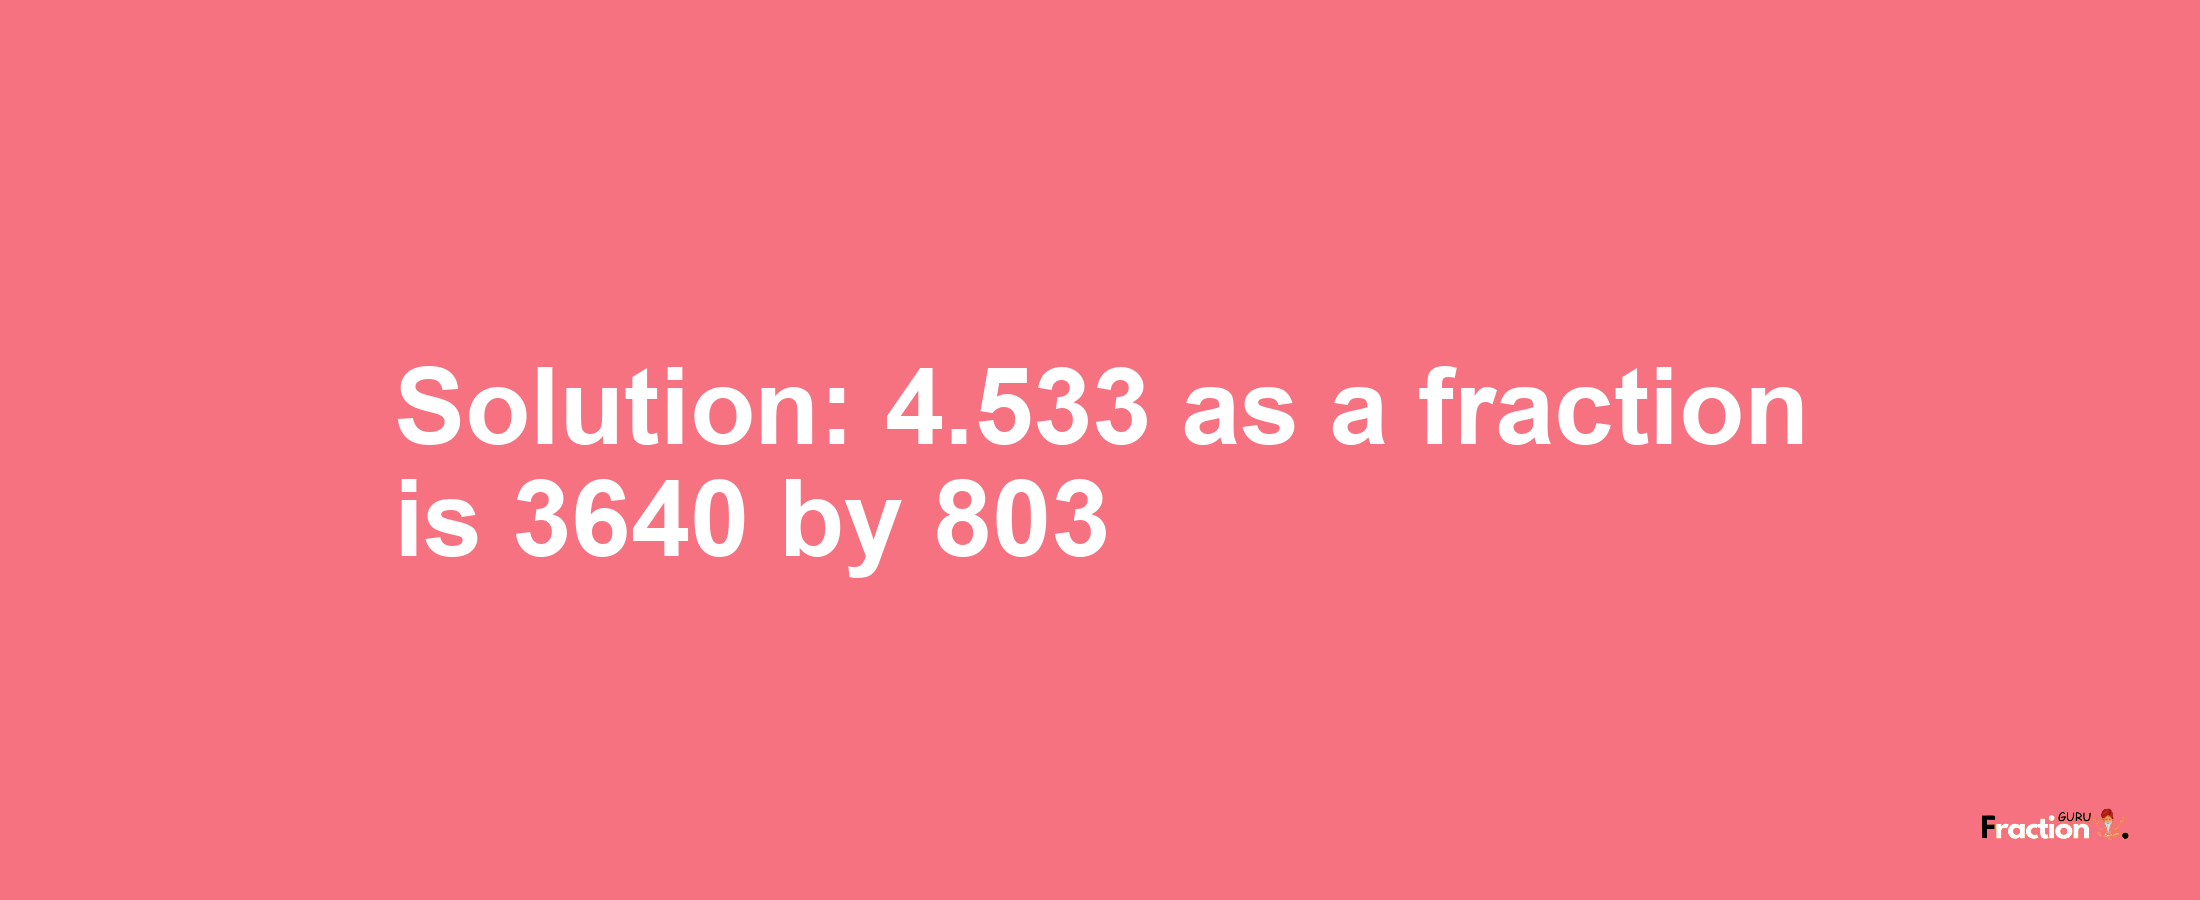 Solution:4.533 as a fraction is 3640/803